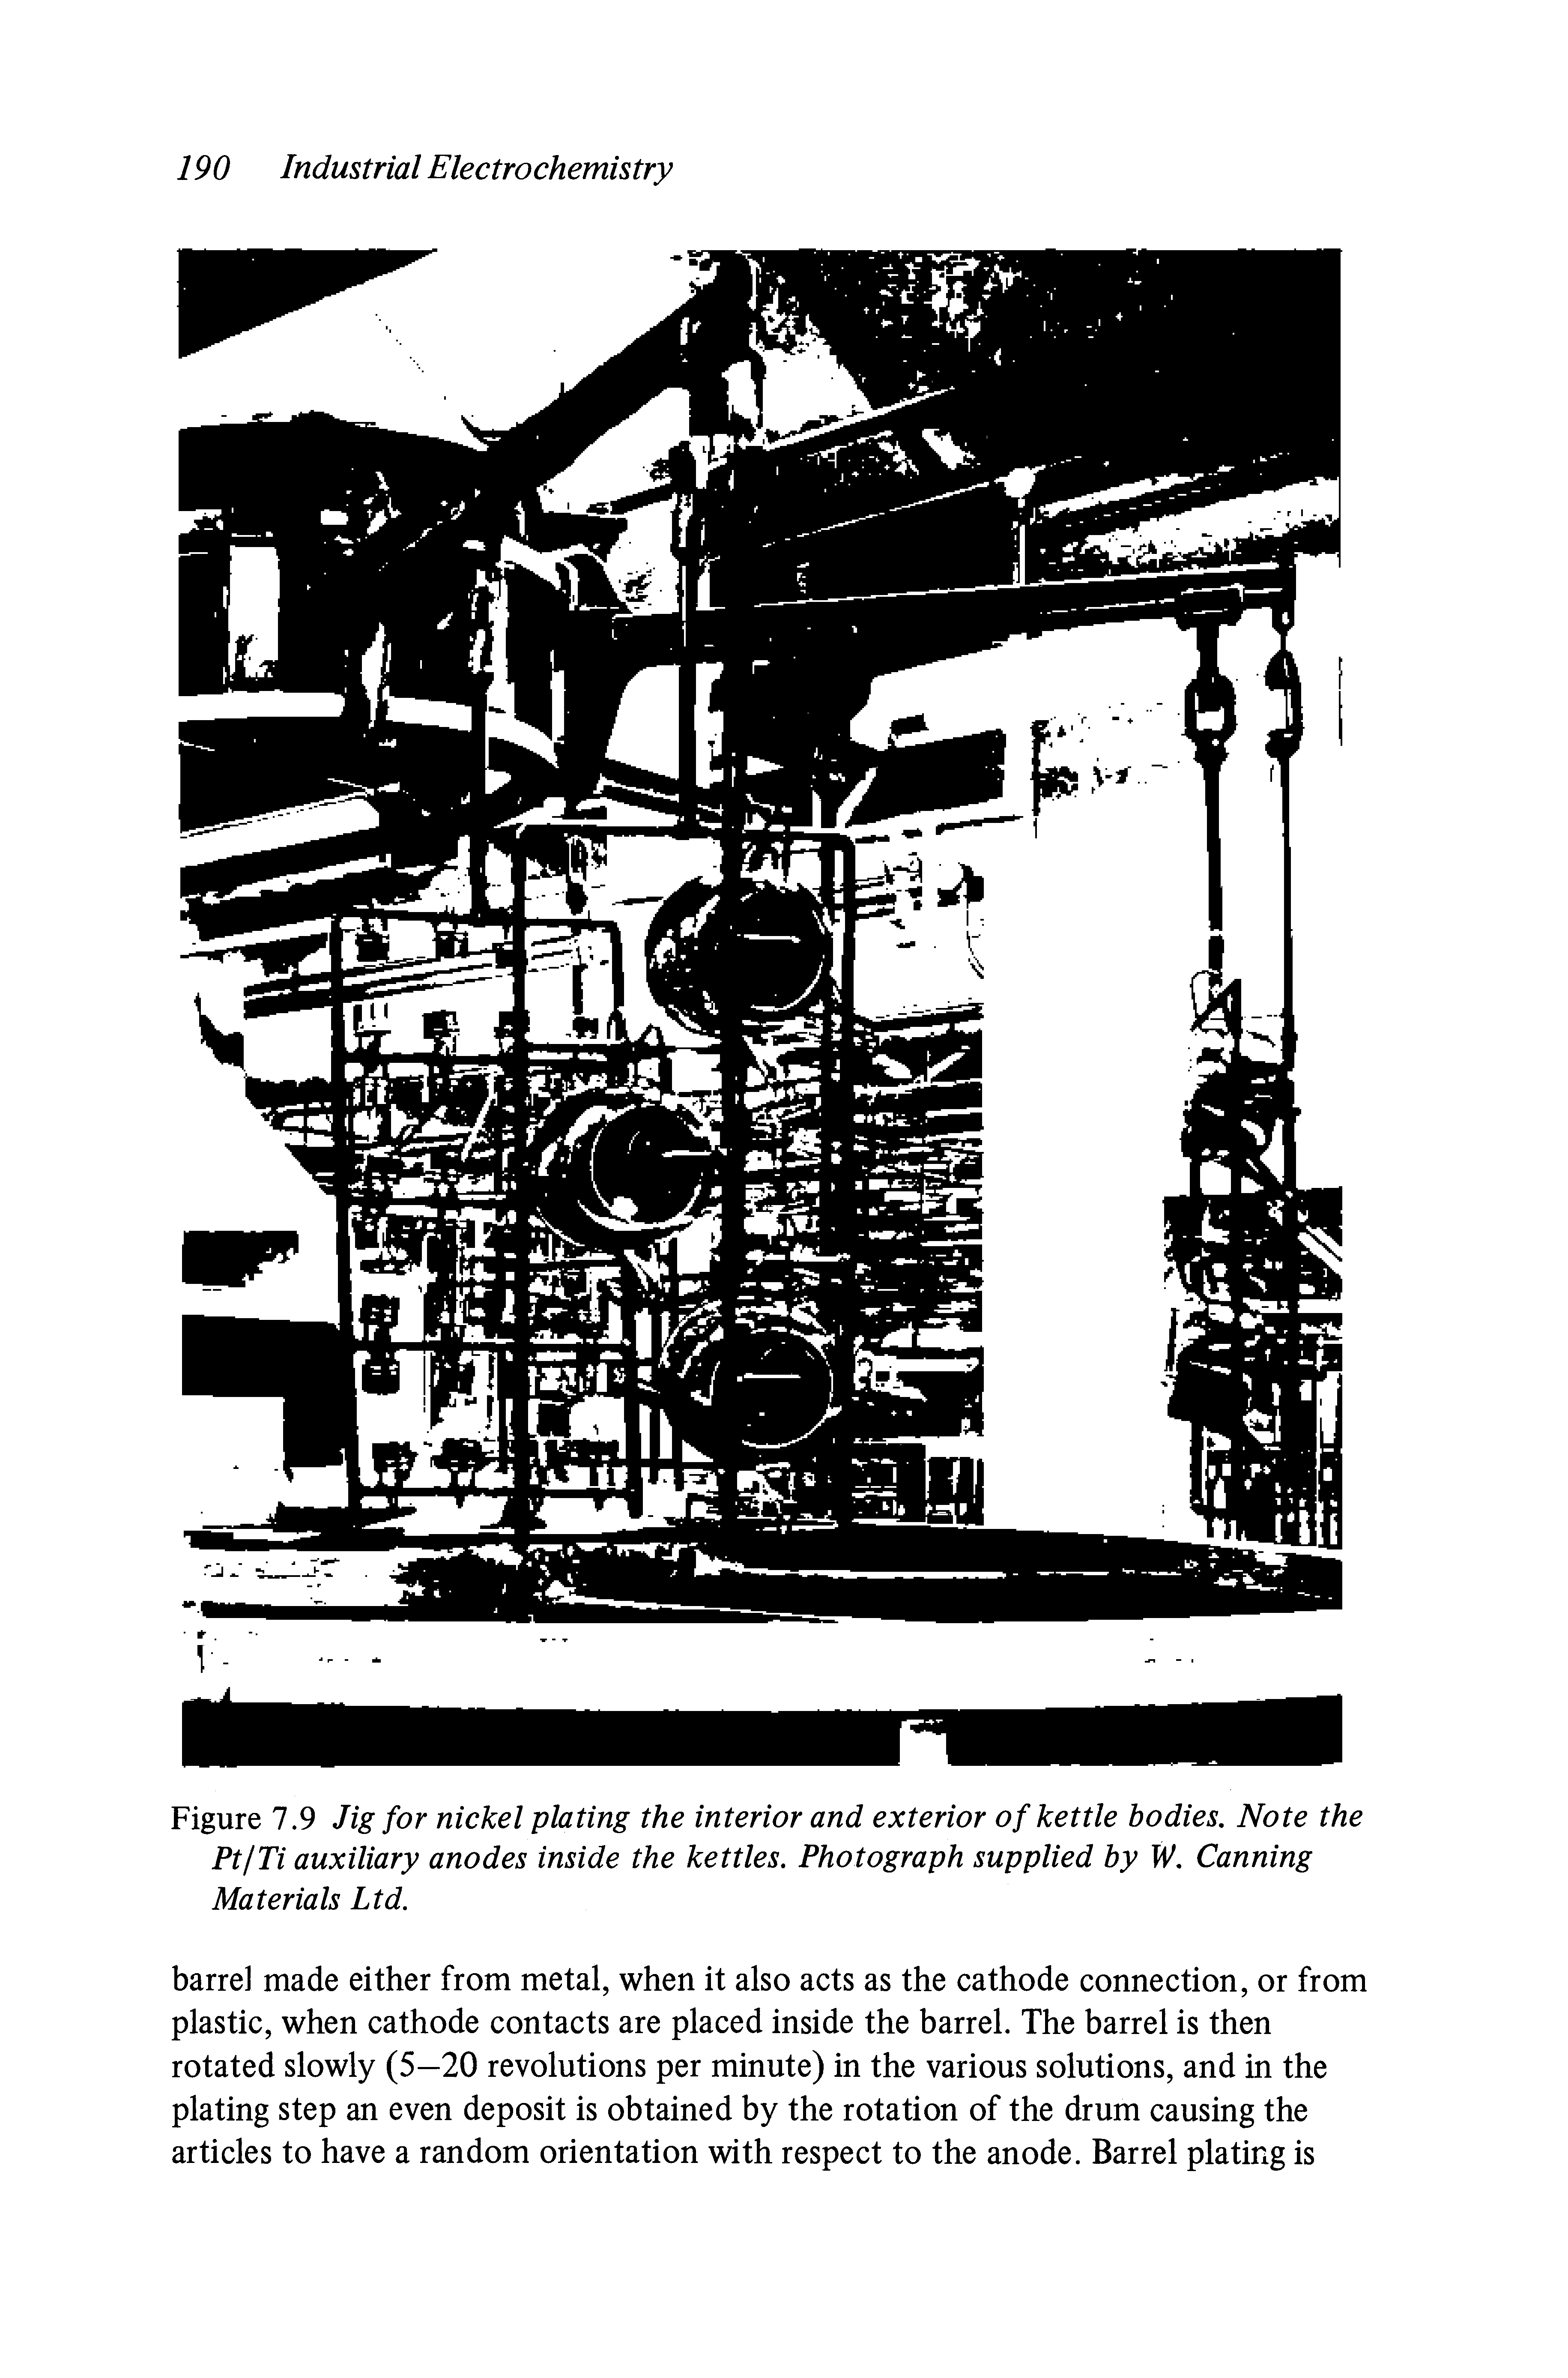 Figure 7.9 Jig for nickel plating the interior and exterior of kettle bodies. Note the PtjTi auxiliary anodes inside the kettles. Photograph supplied by W. Canning Materials Ltd.